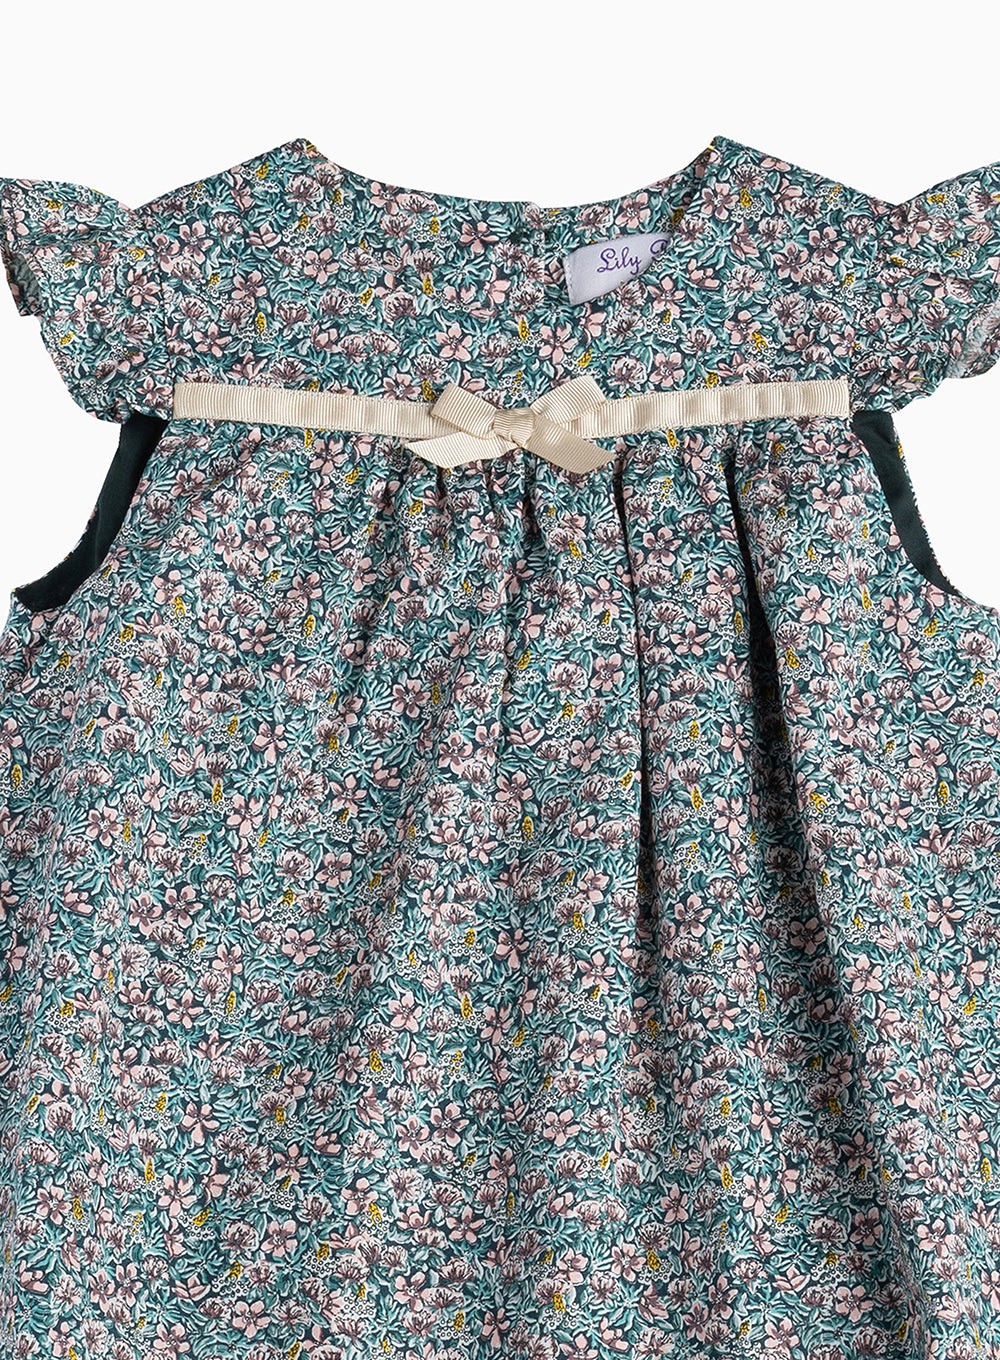 Lily Rose Romper Little Frill Sleeved Romper in Ragged Robin